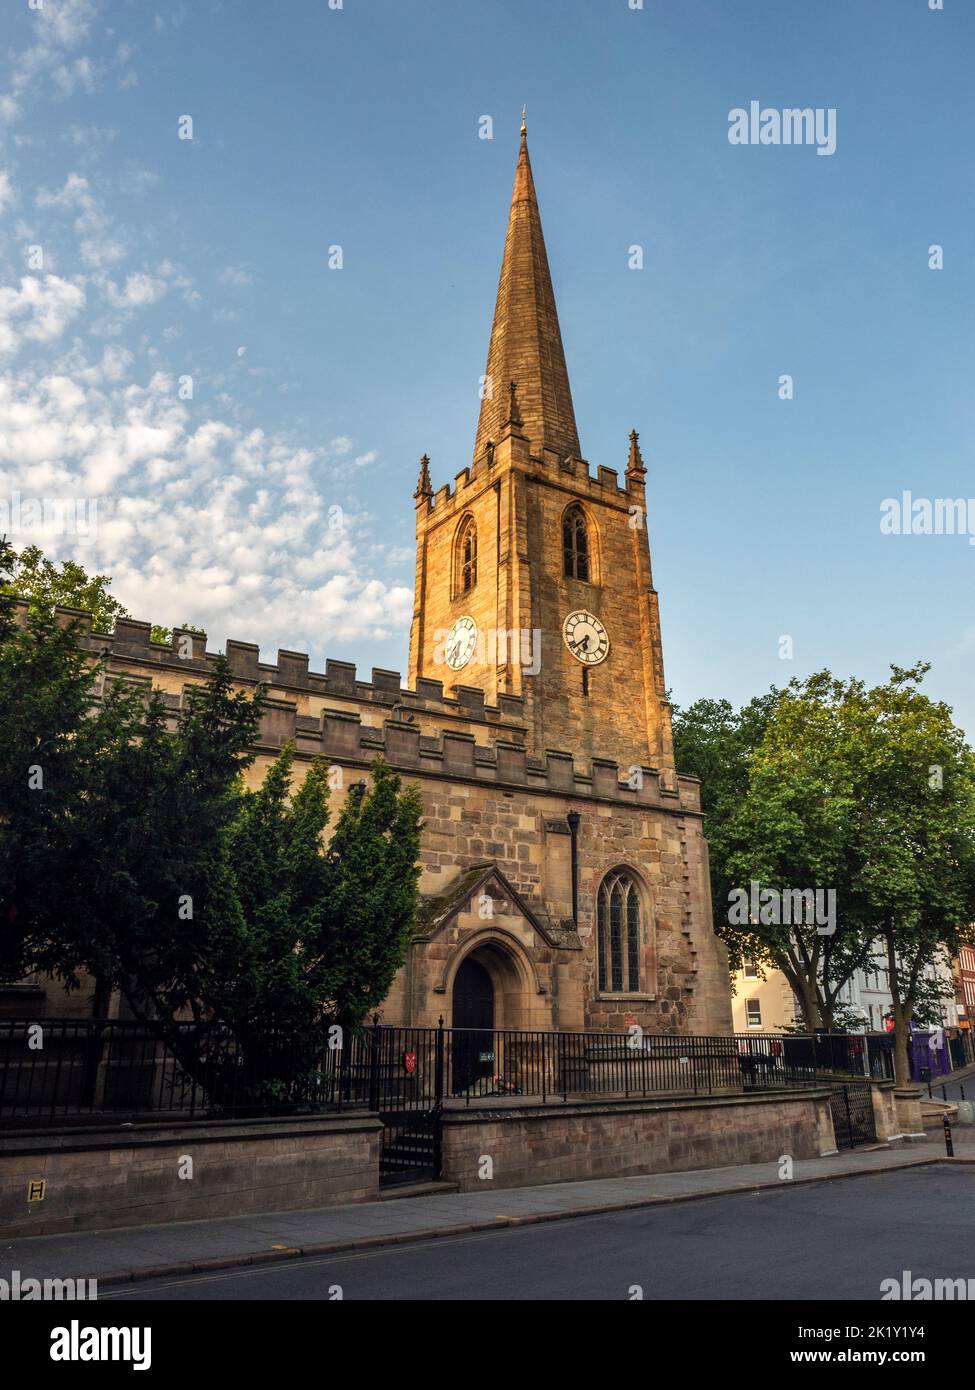 Die Kirche St. Peter mit St. James vom St. Peters Gate in Nottingham Nottinghamshire England Stockfoto